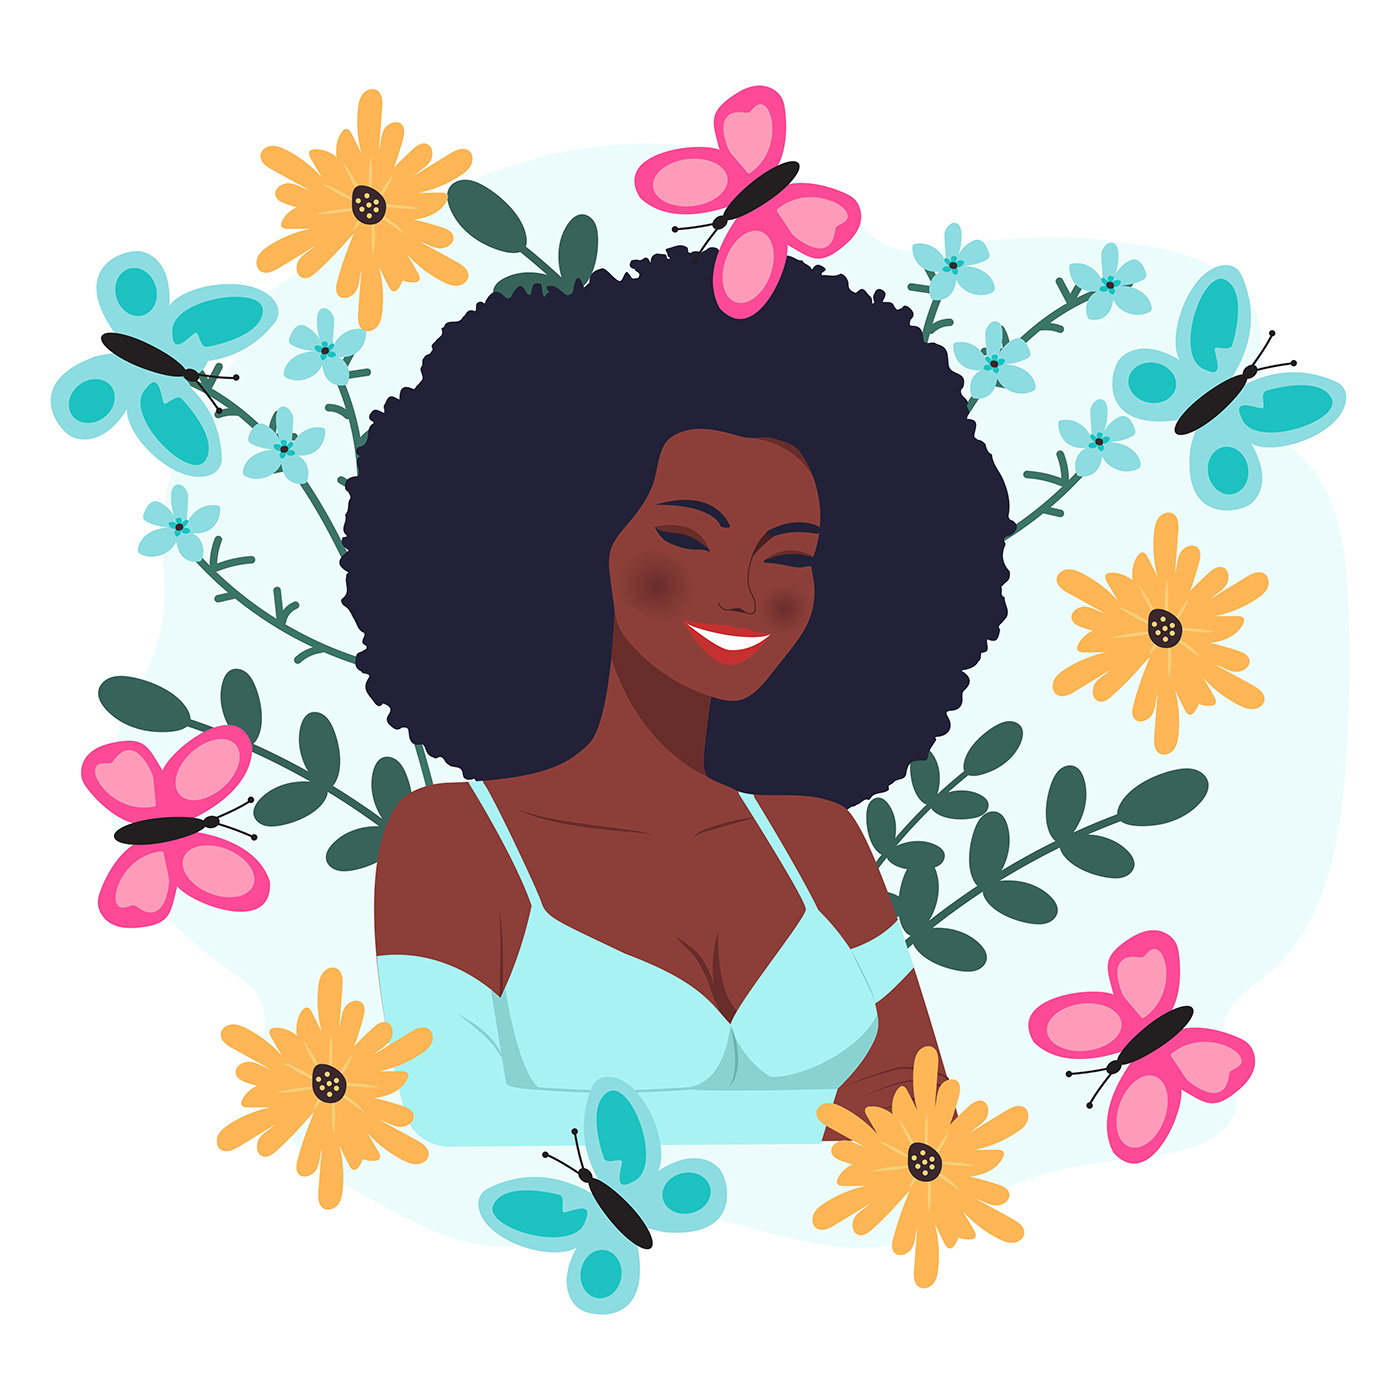 A happy woman surrounded by flowers and butterflies